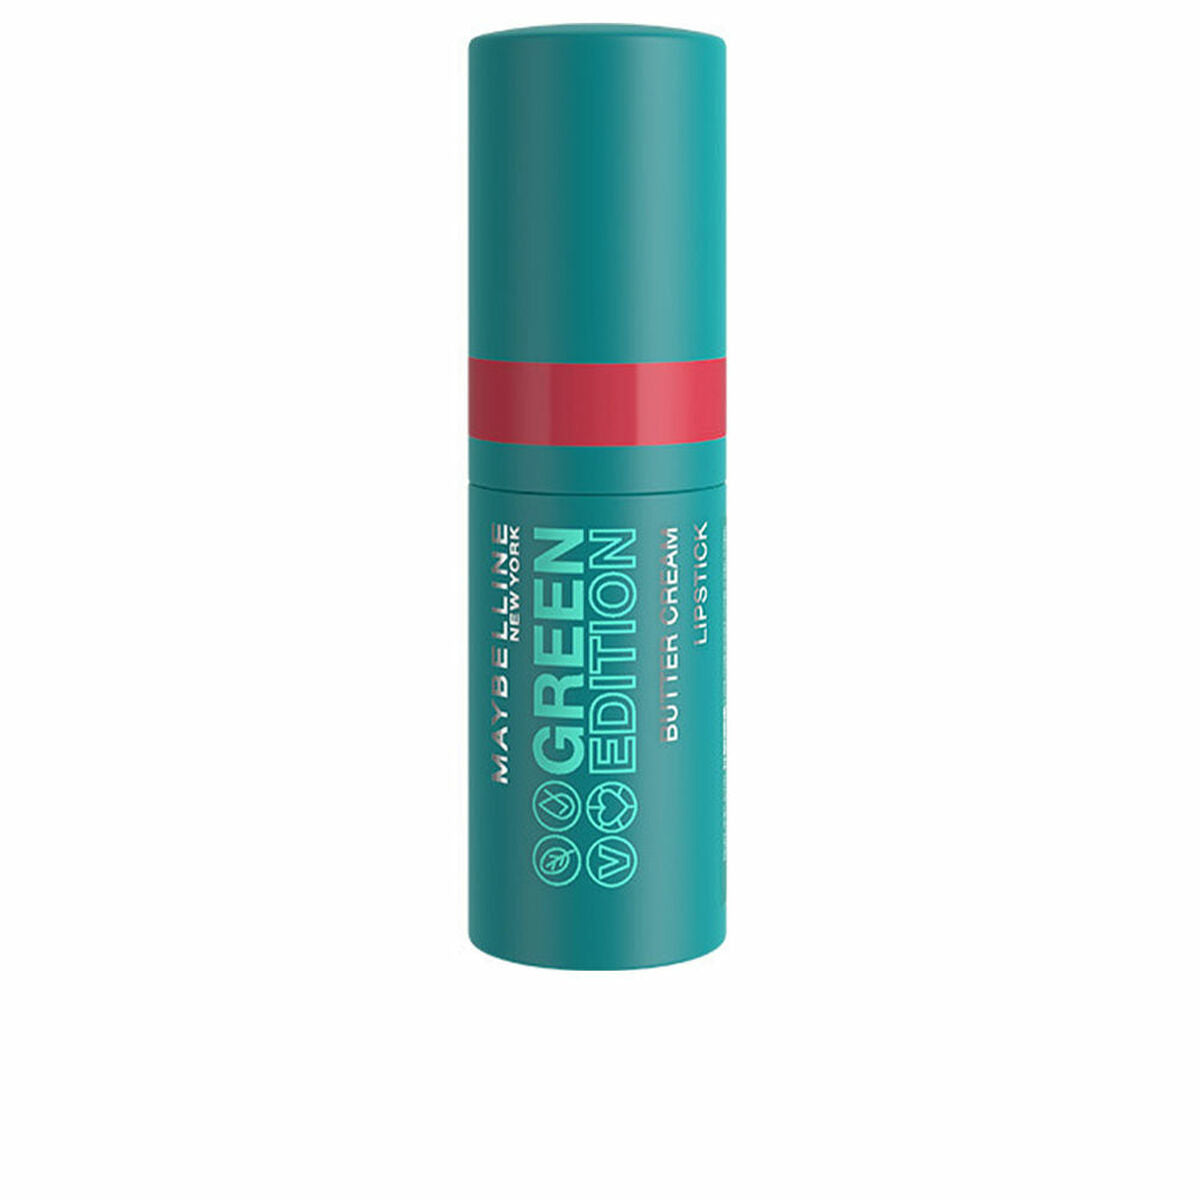 Rossetto idratante Maybelline Green Edition 008-Floral (10 g)